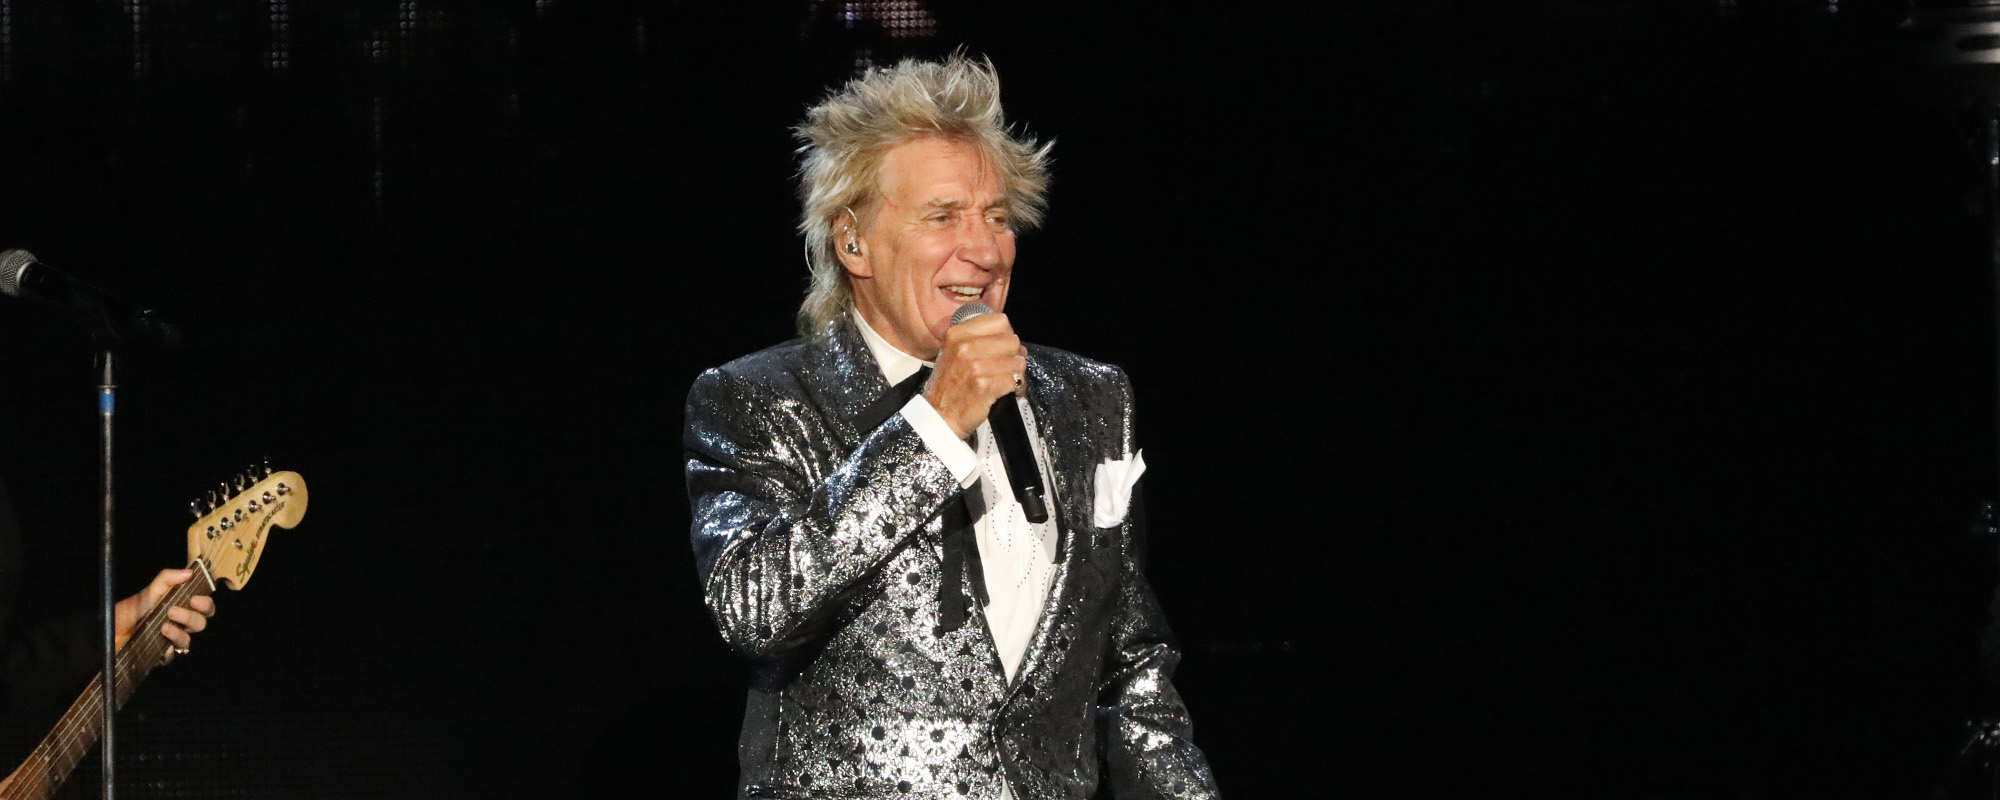 Rod Stewart Says He Won’t Play Saudi Arabia Because of the Country’s Human-Rights Record